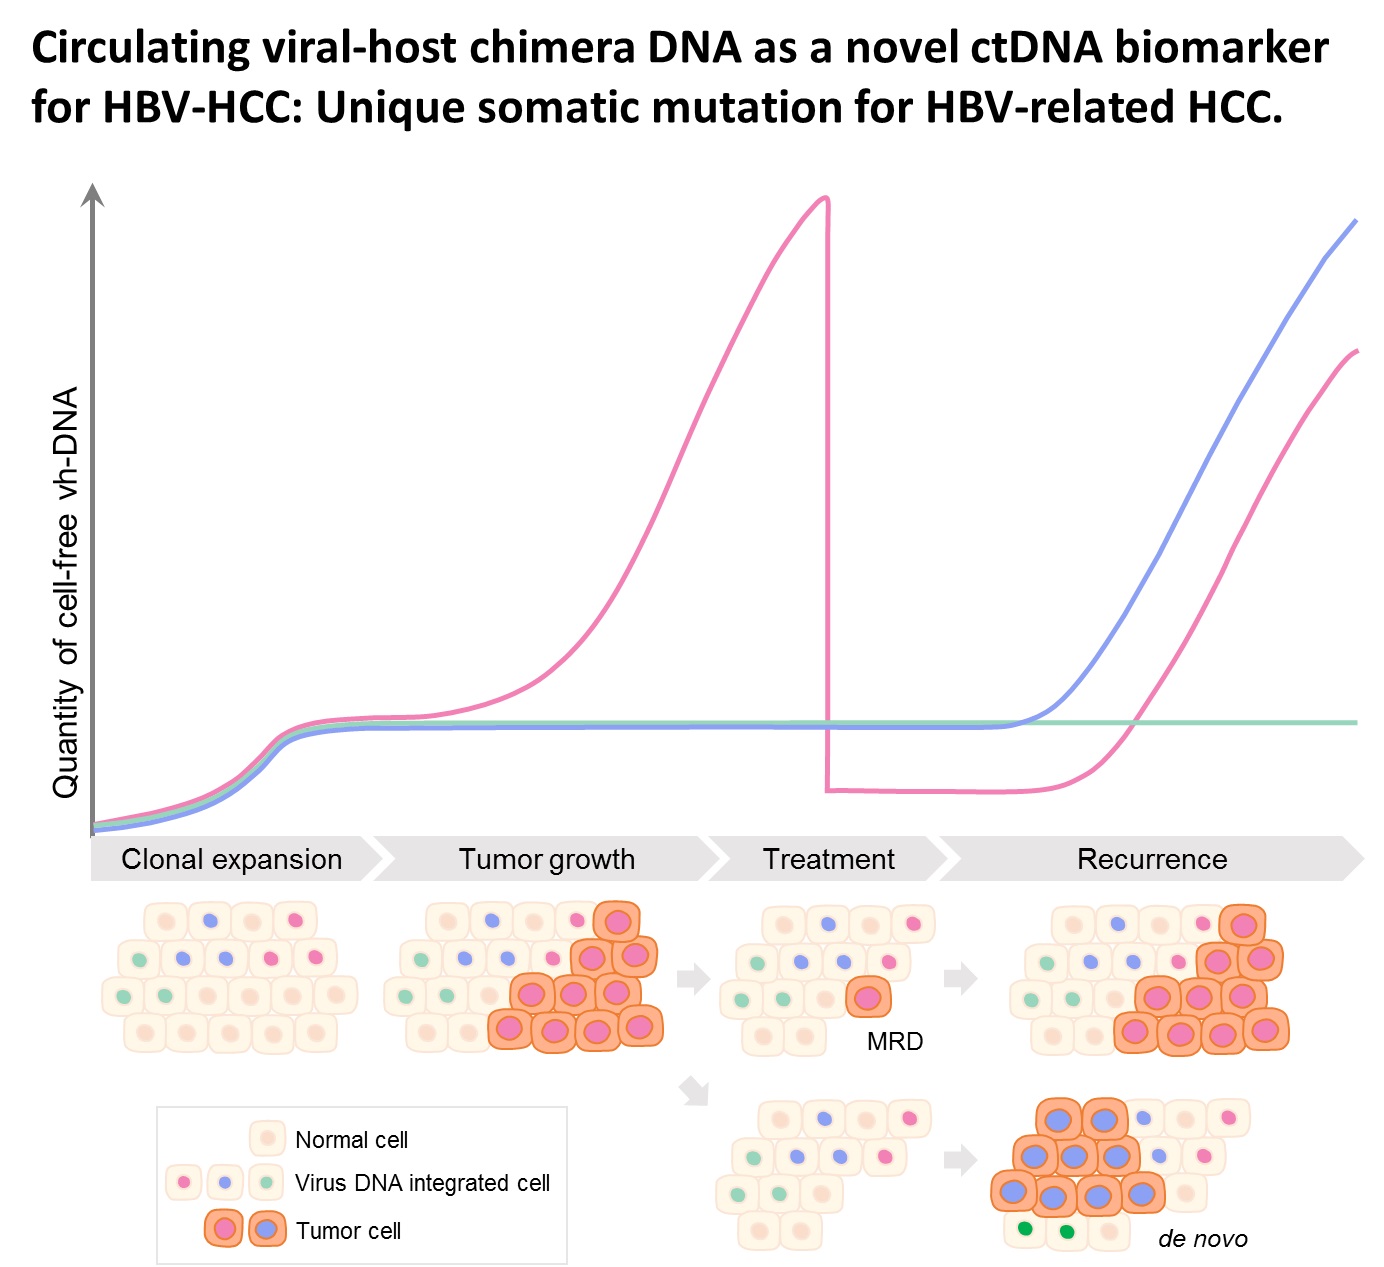 Cell-free virus-host chimera DNA from hepatitis B virus integration sites as a circulating biomarker for monitoring hepatocellular carcinoma